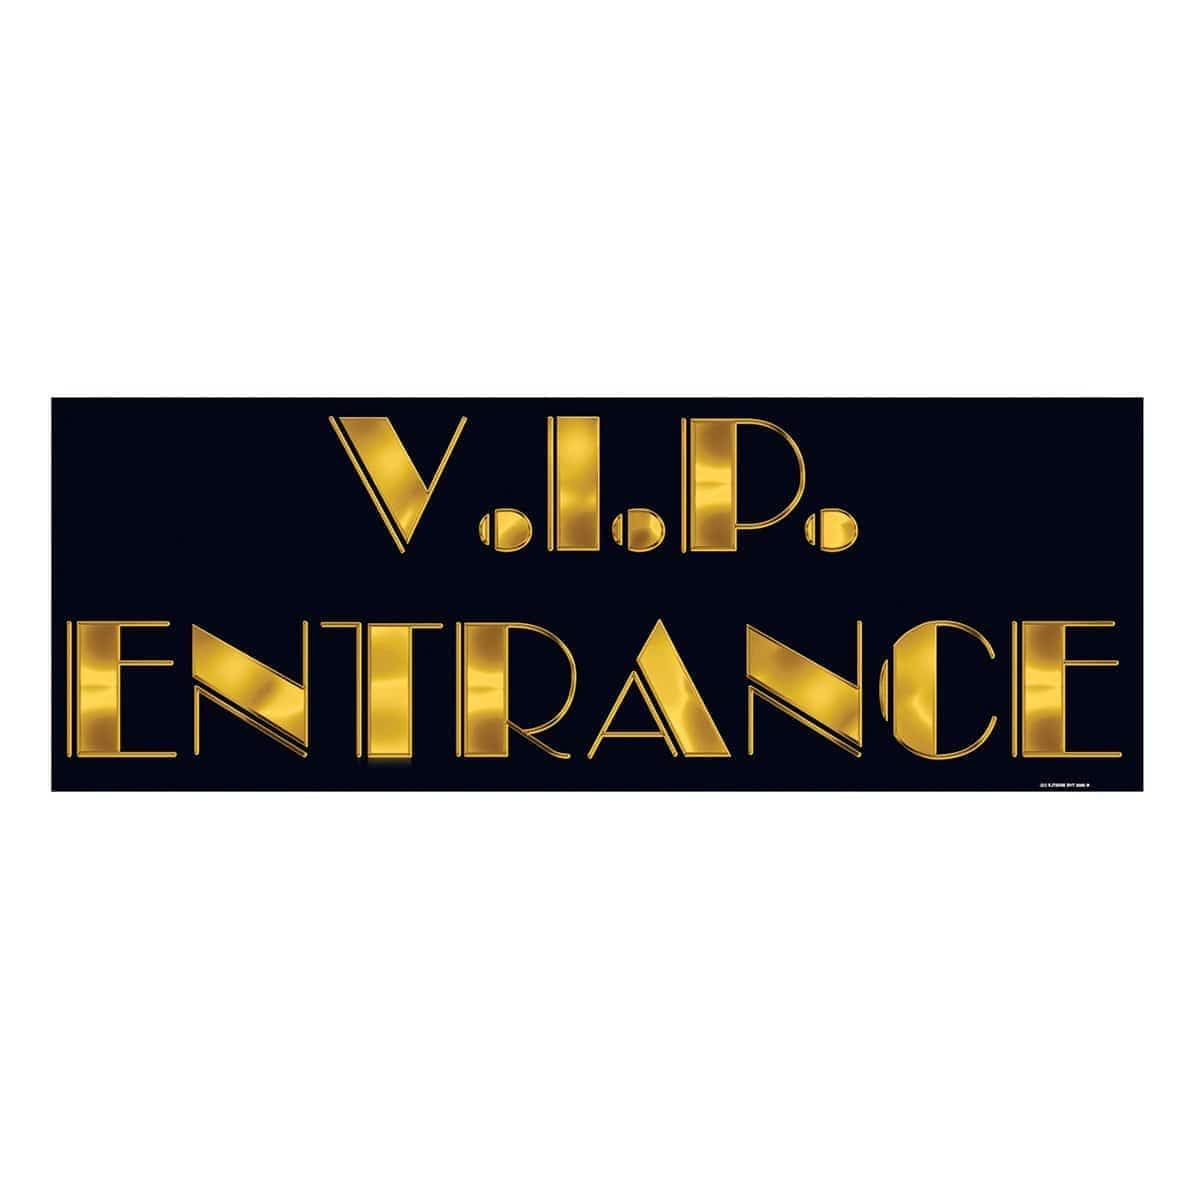 Buy Theme Party VIP Entrance Sign sold at Party Expert